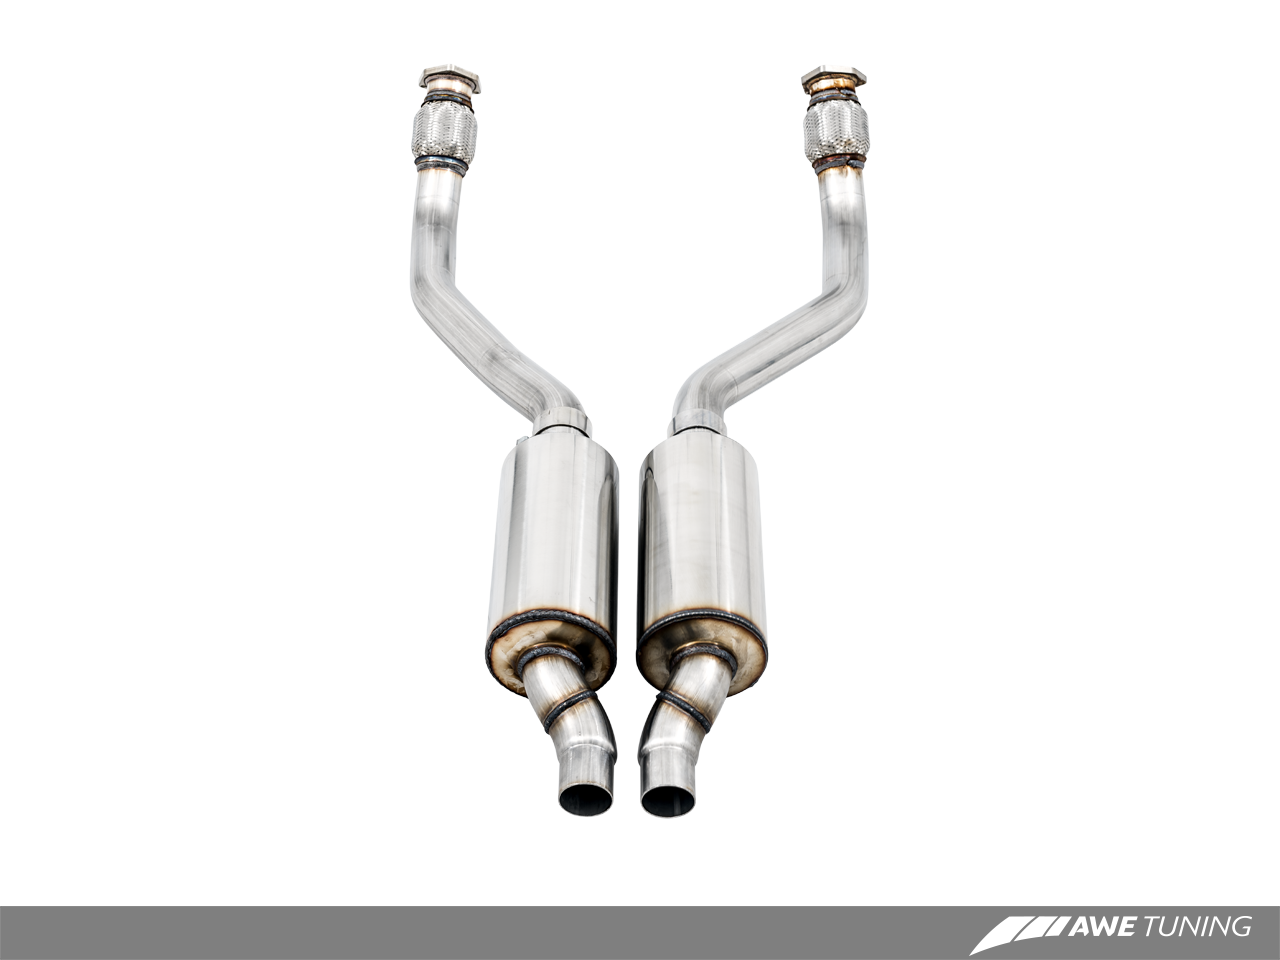 AWE Touring Edition Exhaust for Audi C7 A6 3.0T - Motorsports LA